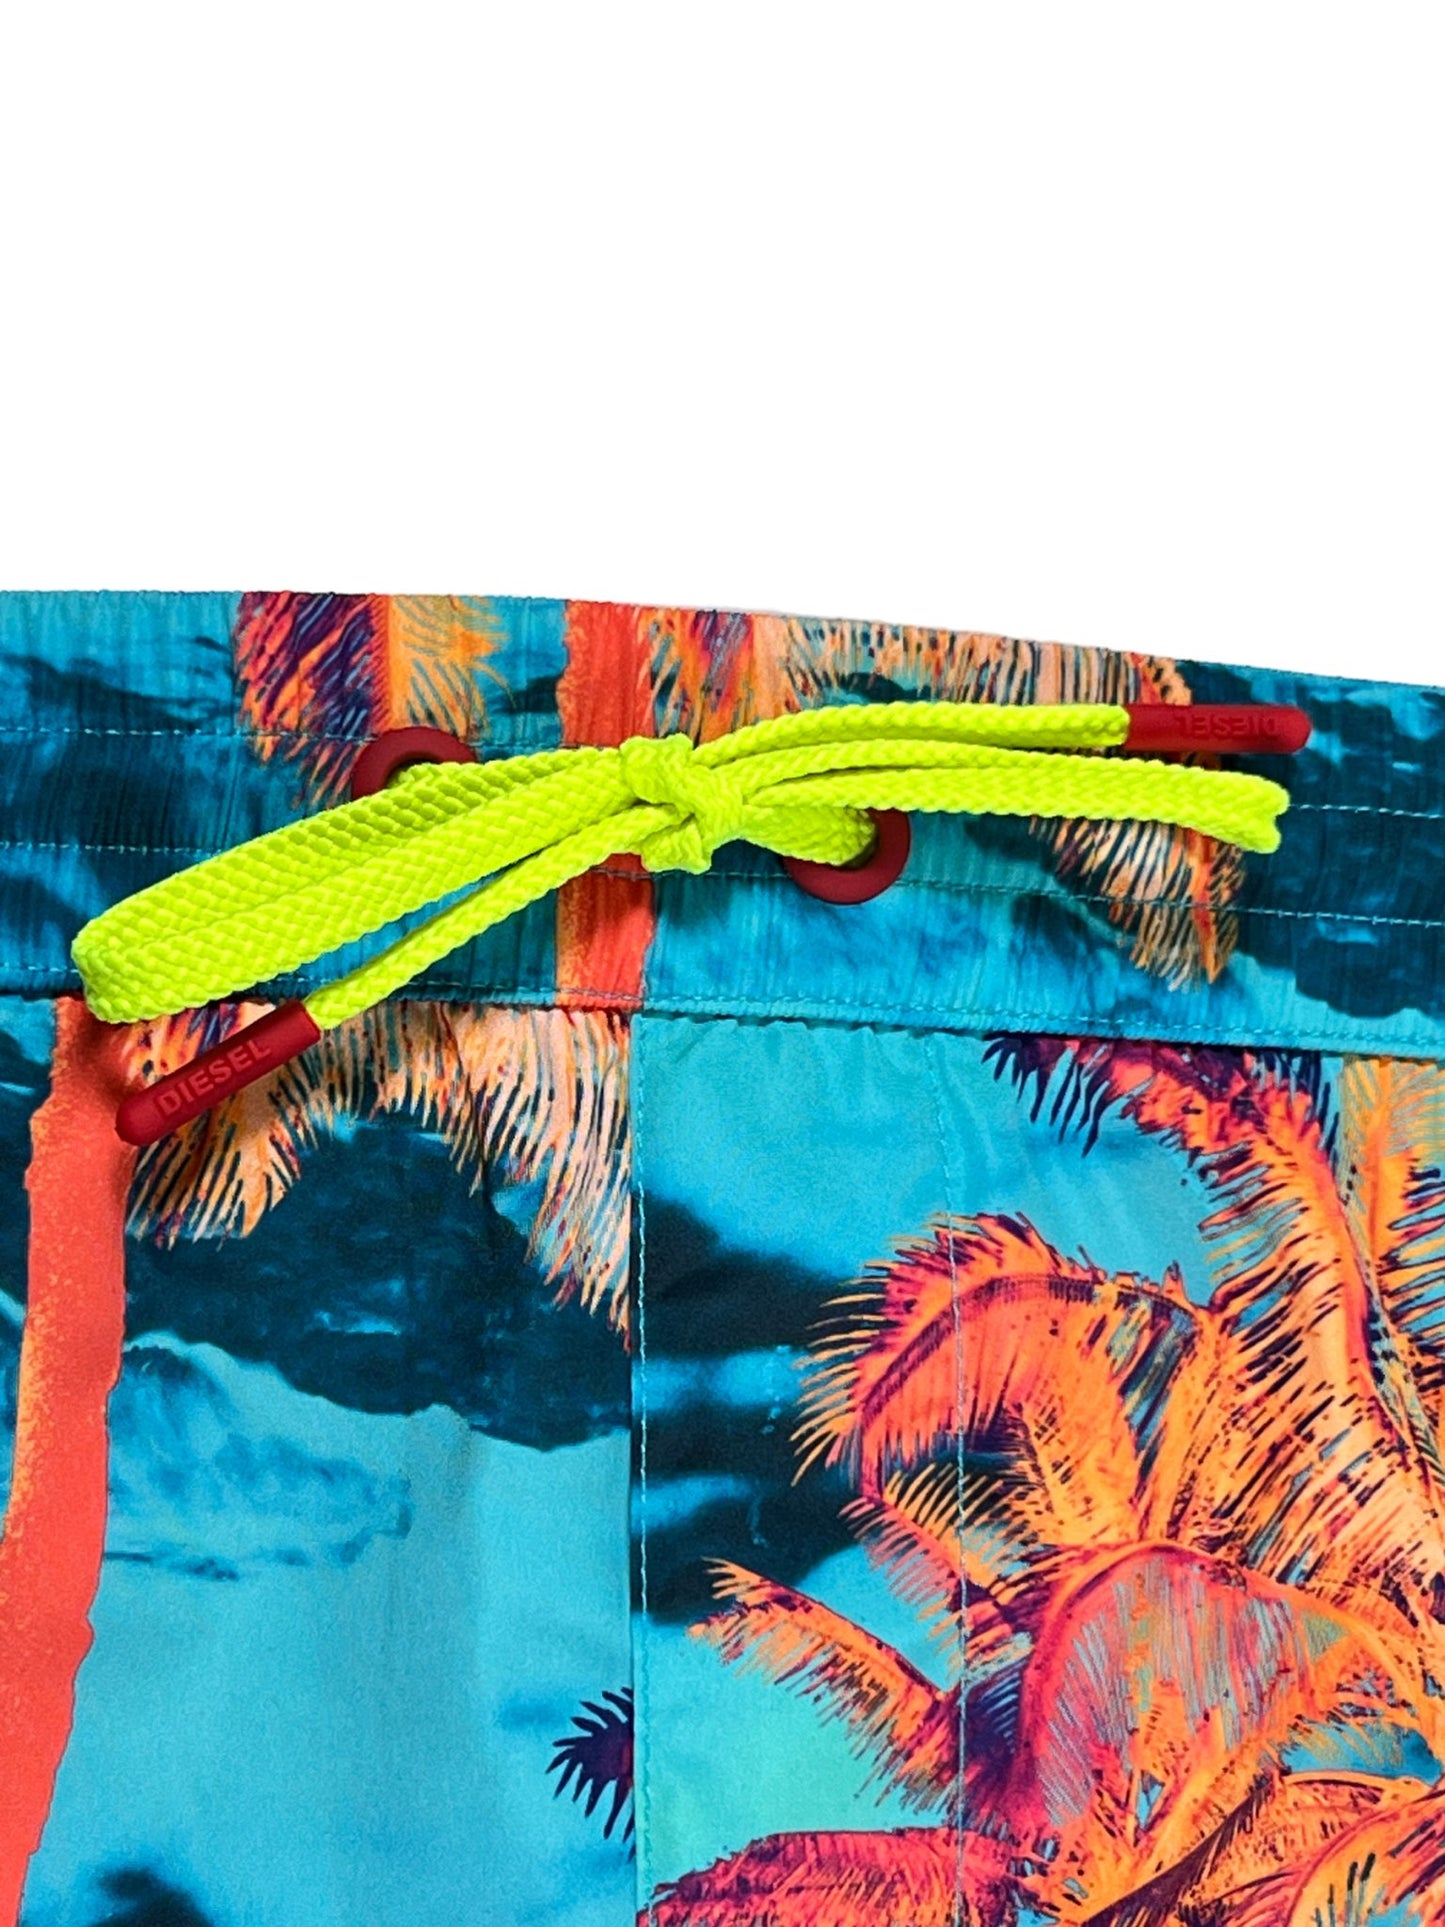 Colorful men's DIESEL BMBX-KEN-37-ZIP BOXER MEDIUM with neon elasticated drawstring waist and tropical print, made from recycled fabric.